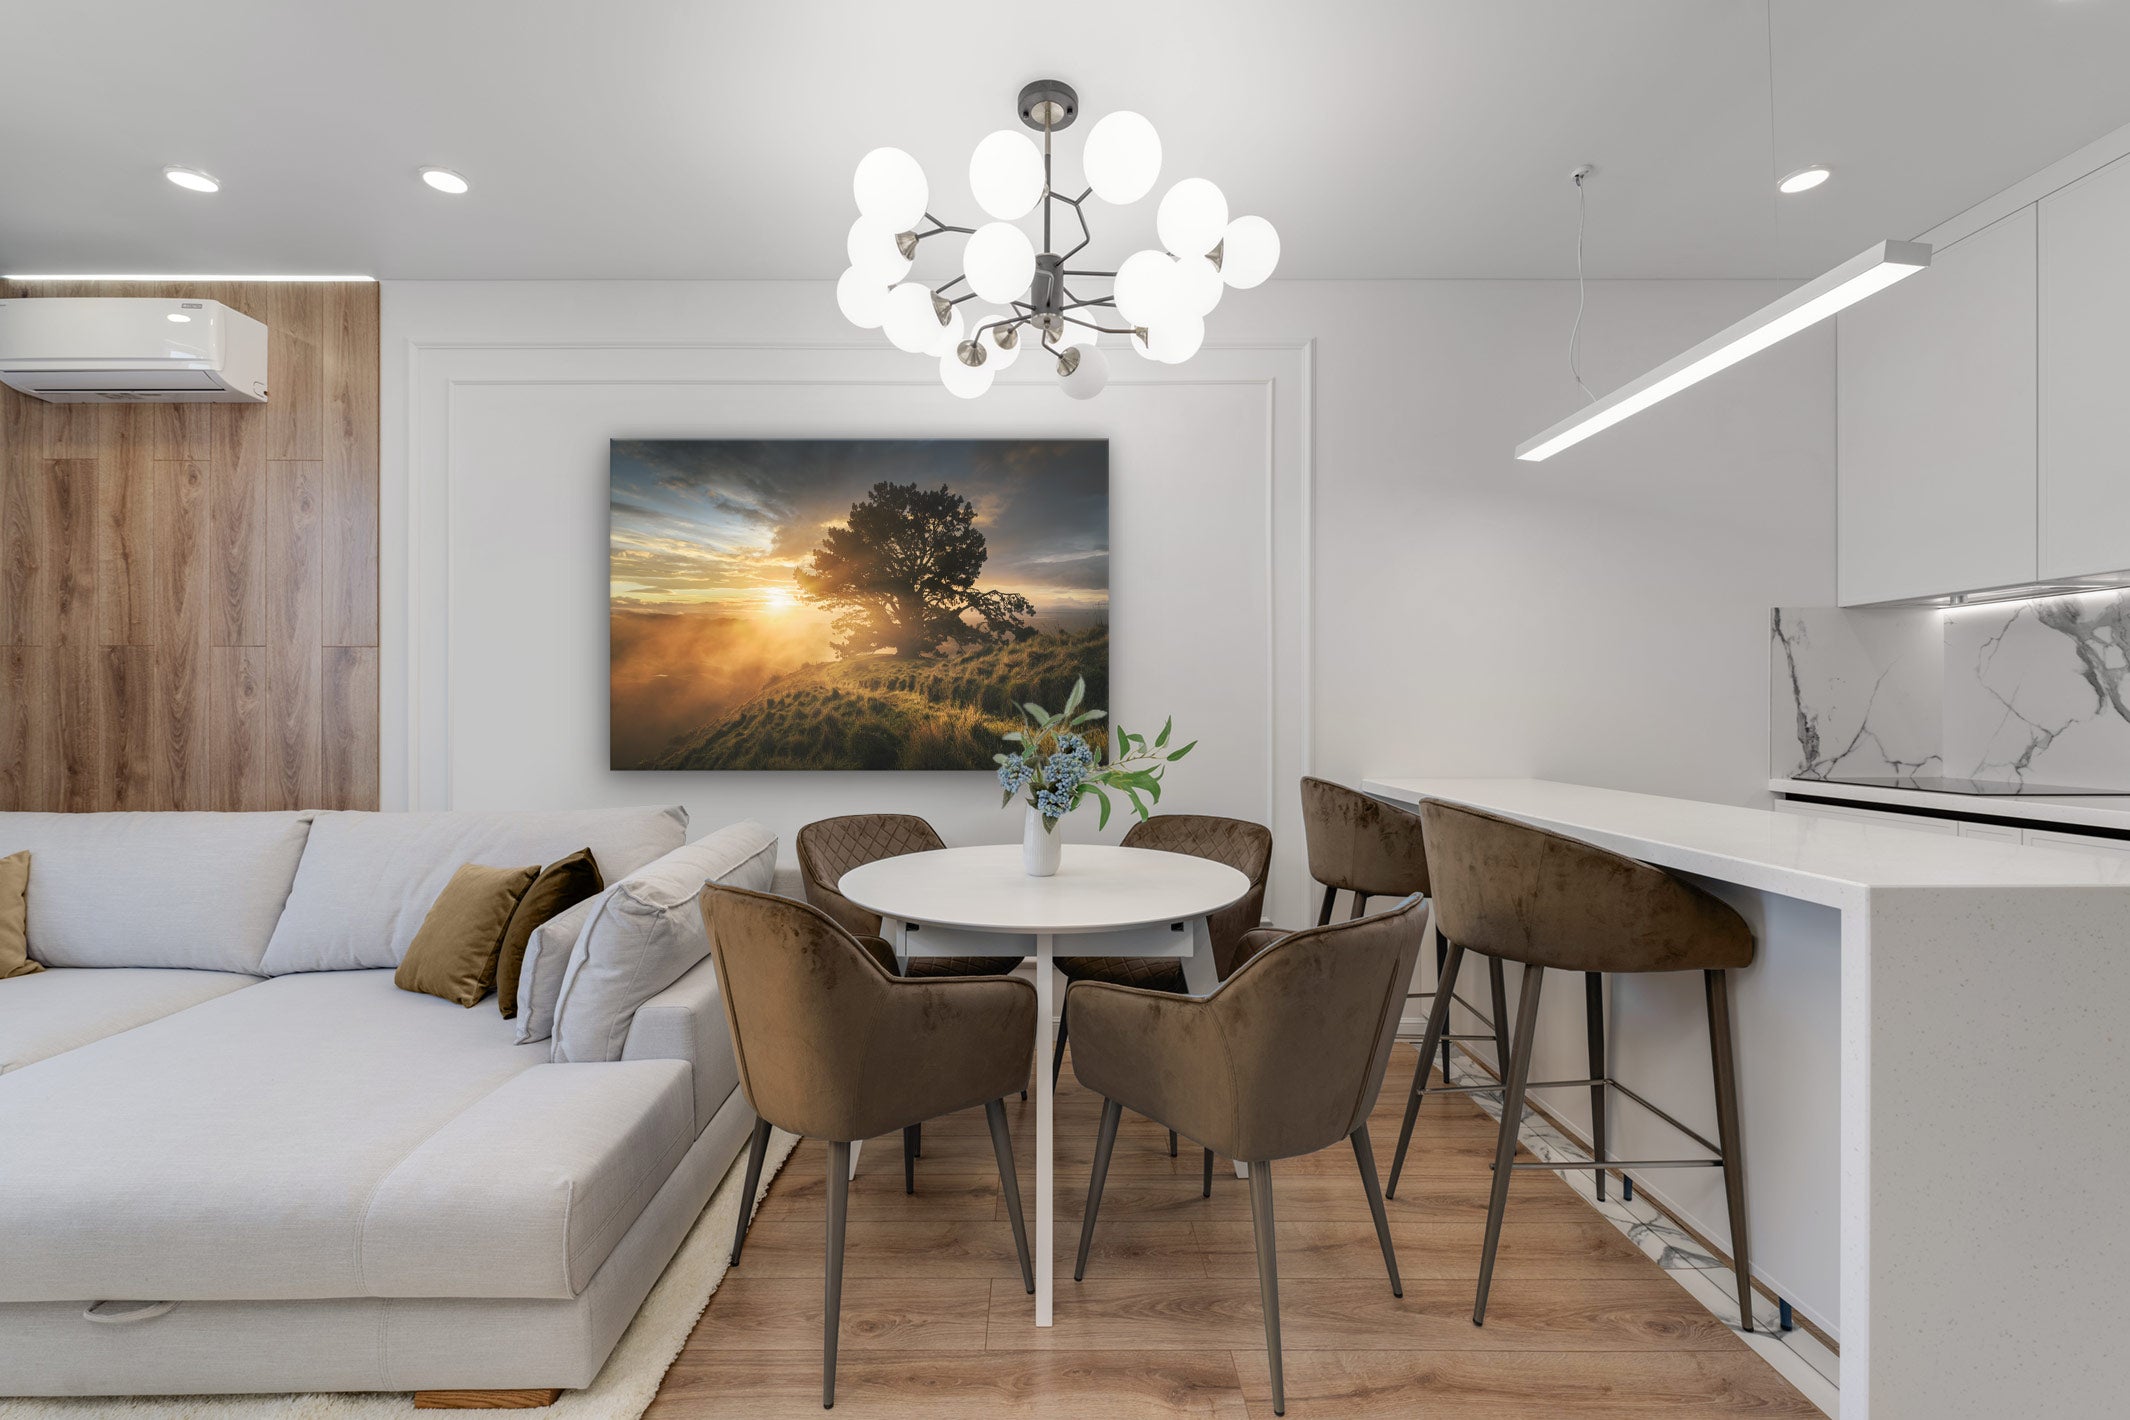 New Zealand landscape on canvas on a wall in a dining room with dining table & chairs, barstool, kitchen and large pendant light